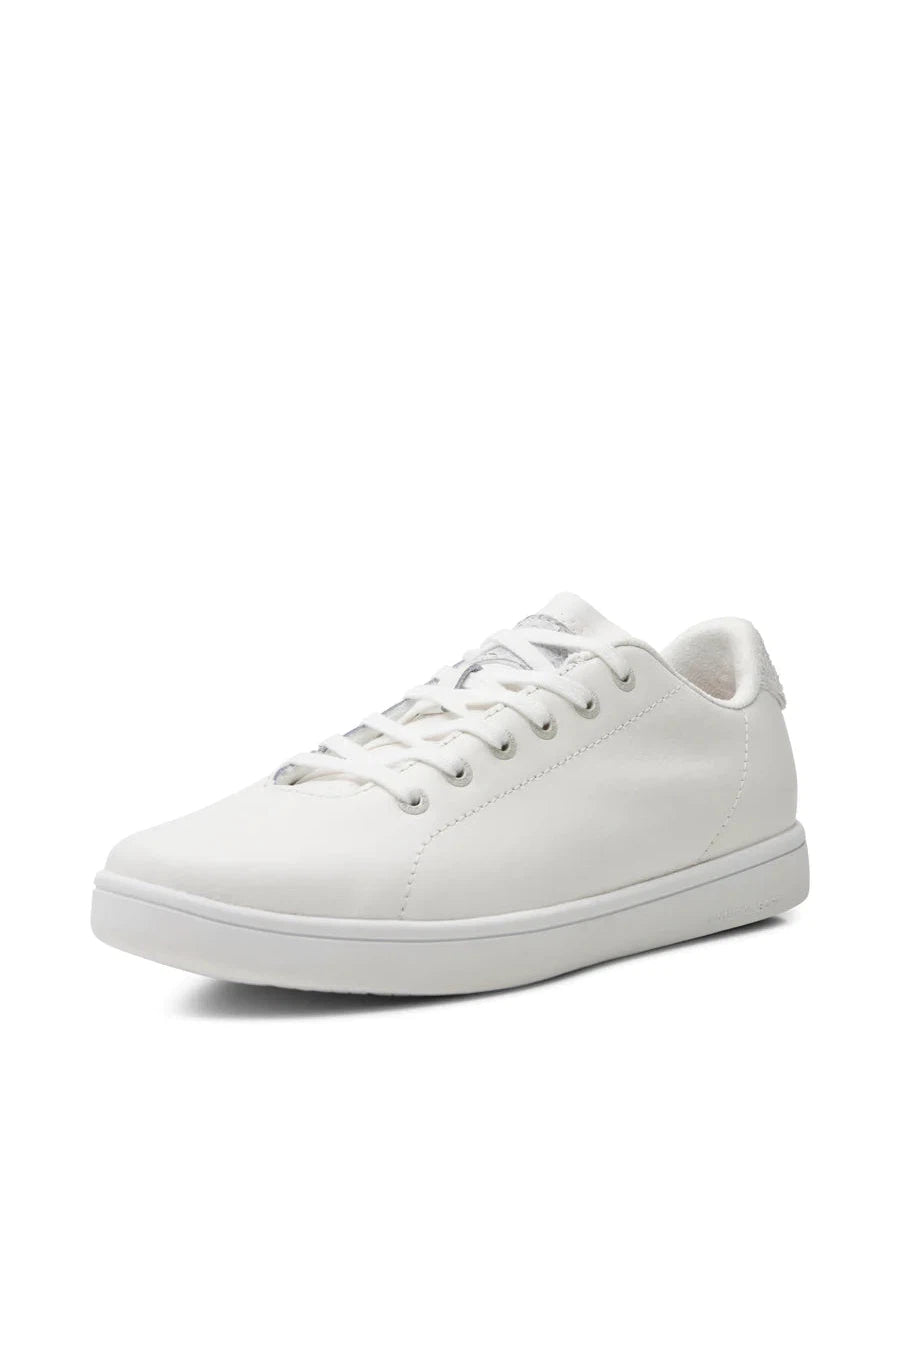 Woden Jane Leather III - Blanc De Blanc Sneakers-Accessories-Ohh! By Gum - Shop Sustainable